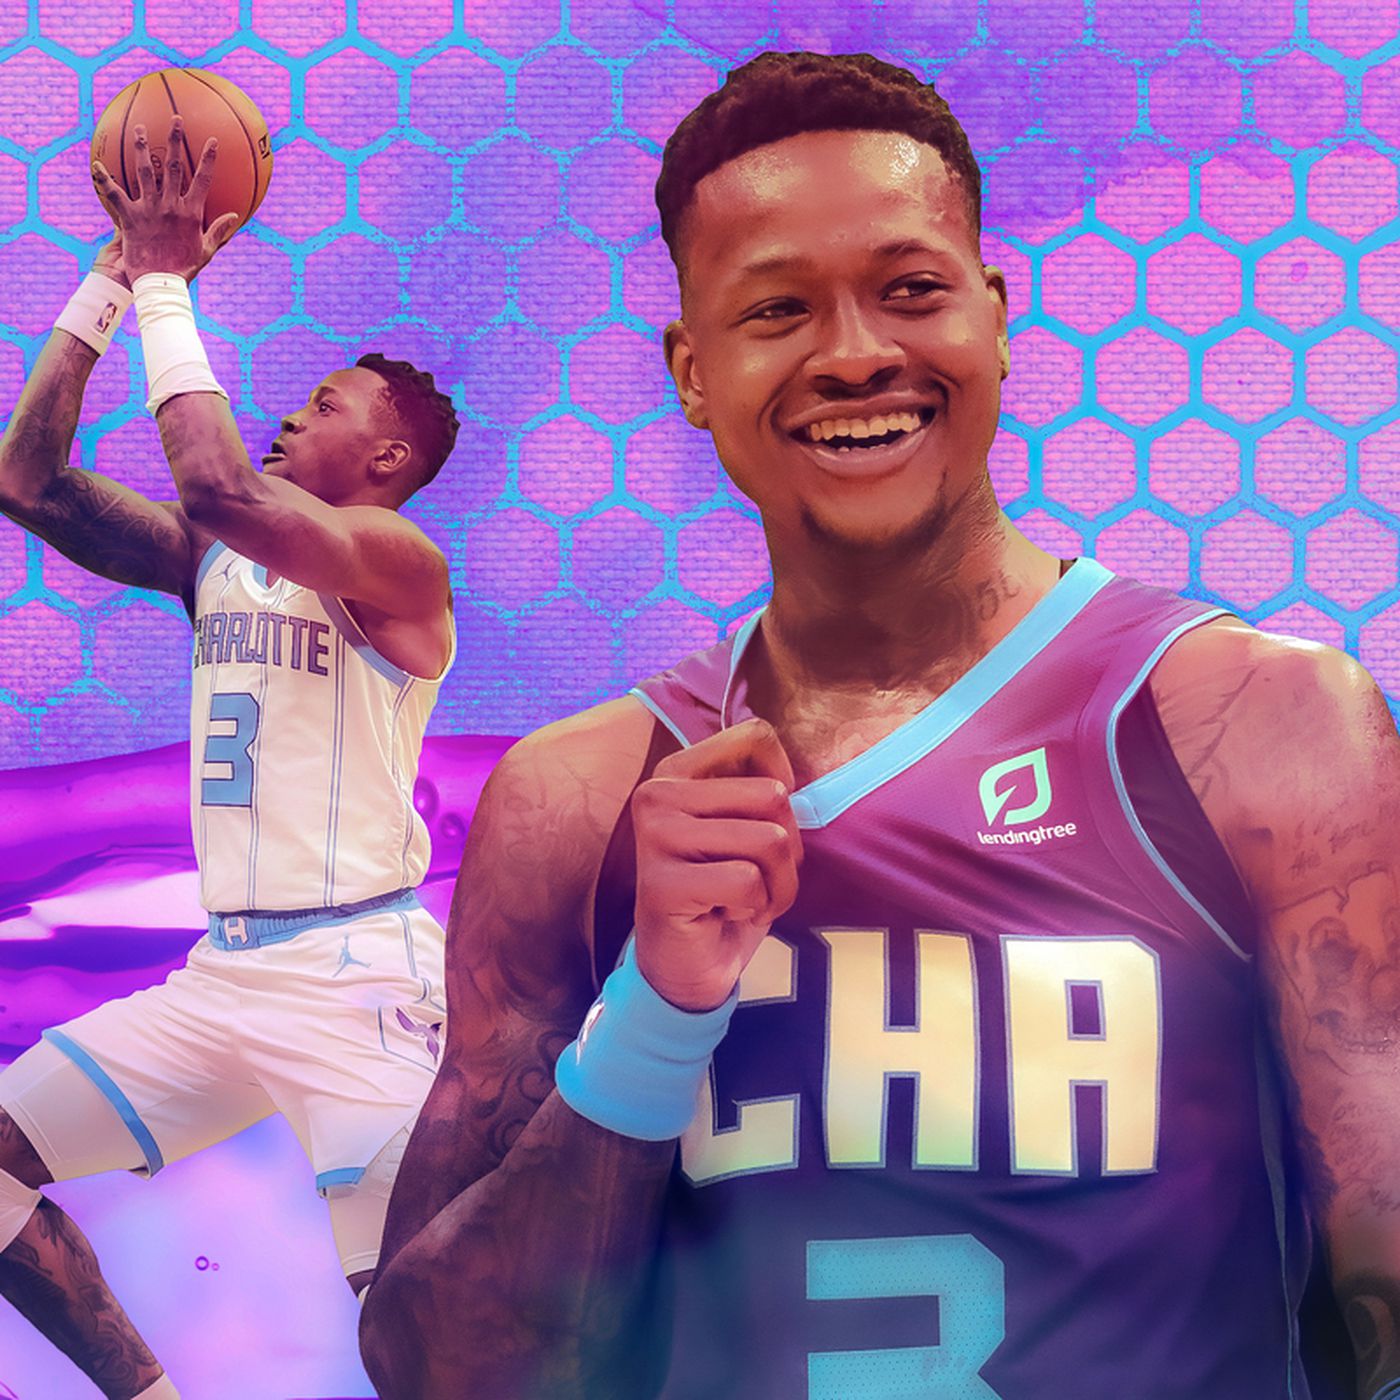 terry rozier charlotte hornets jersey